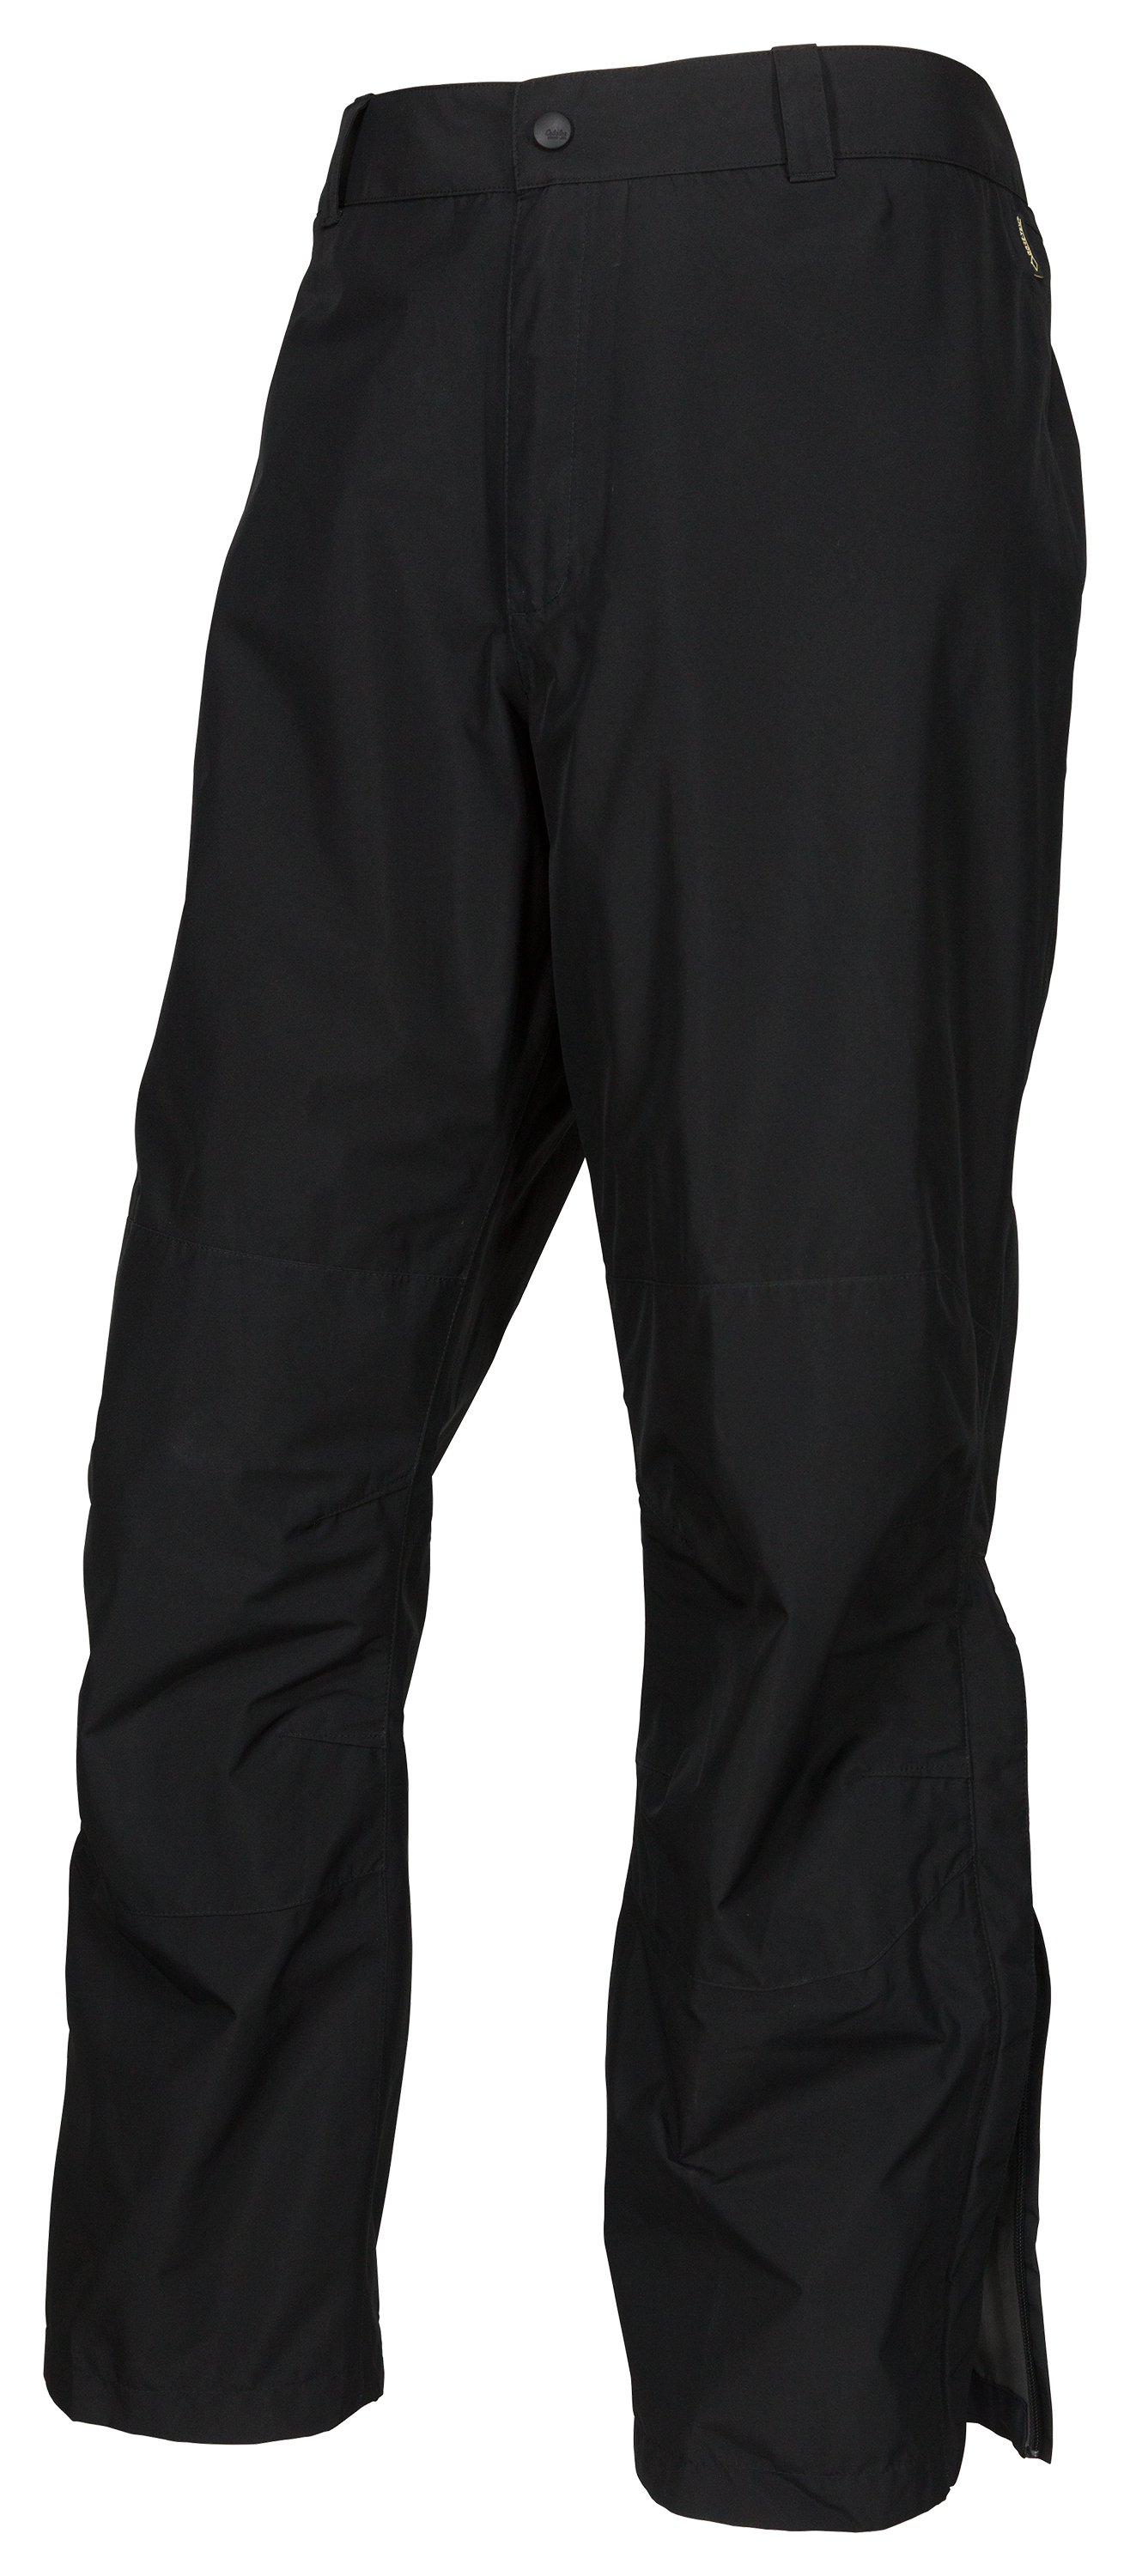 Johnny Morris Bass Pro Shops Guidewear Rainy River Pants with GORE-TEX  Paclite for Men